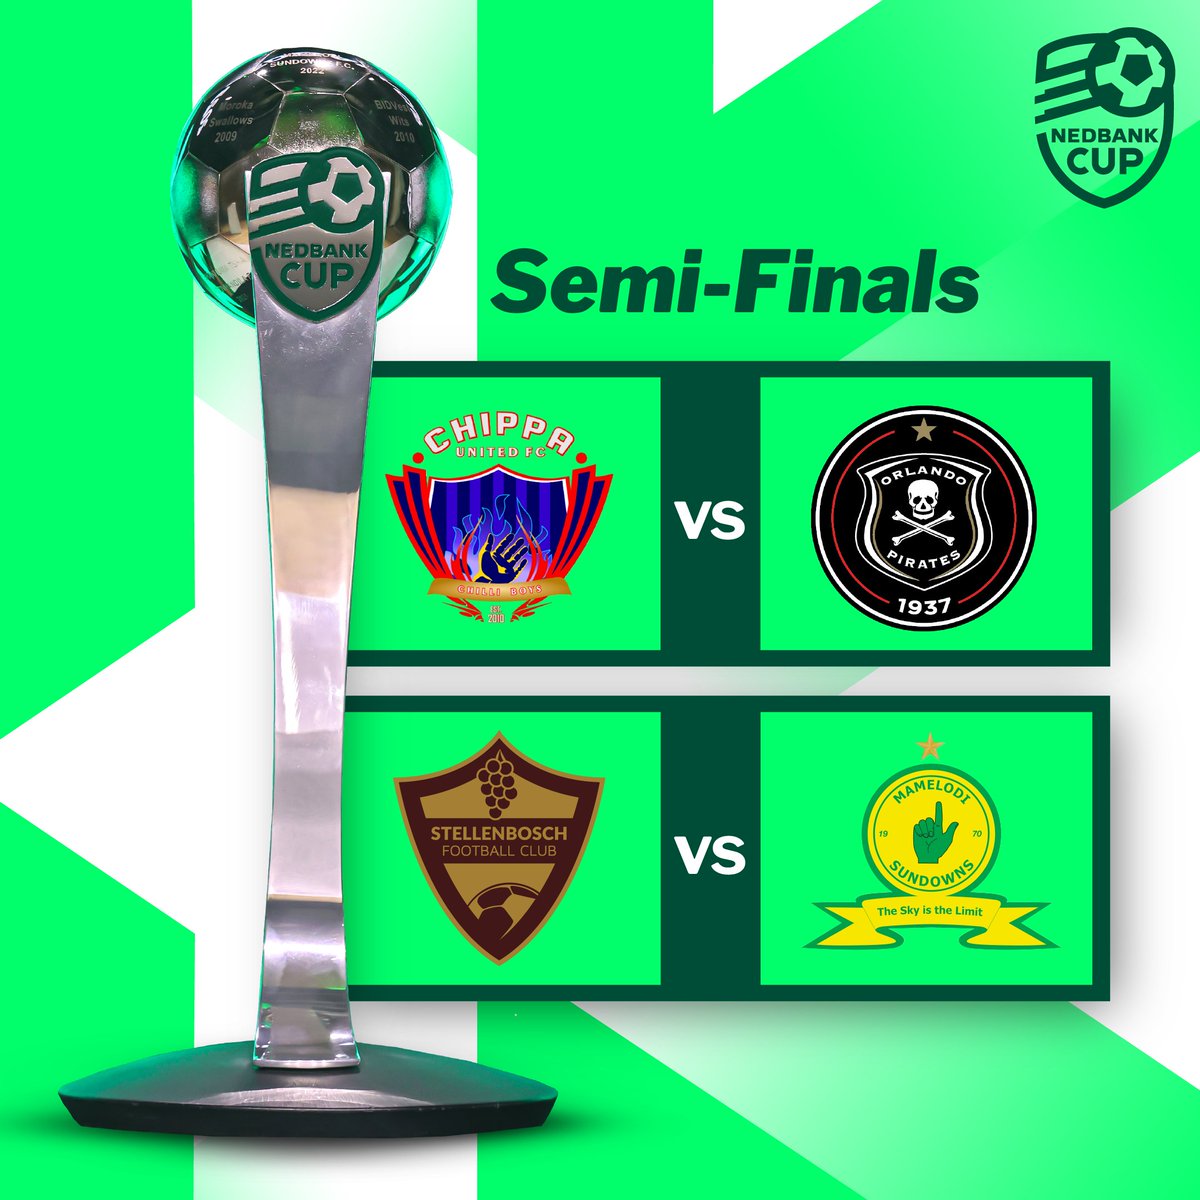 The #NedbankCup semi-finals are locked in!